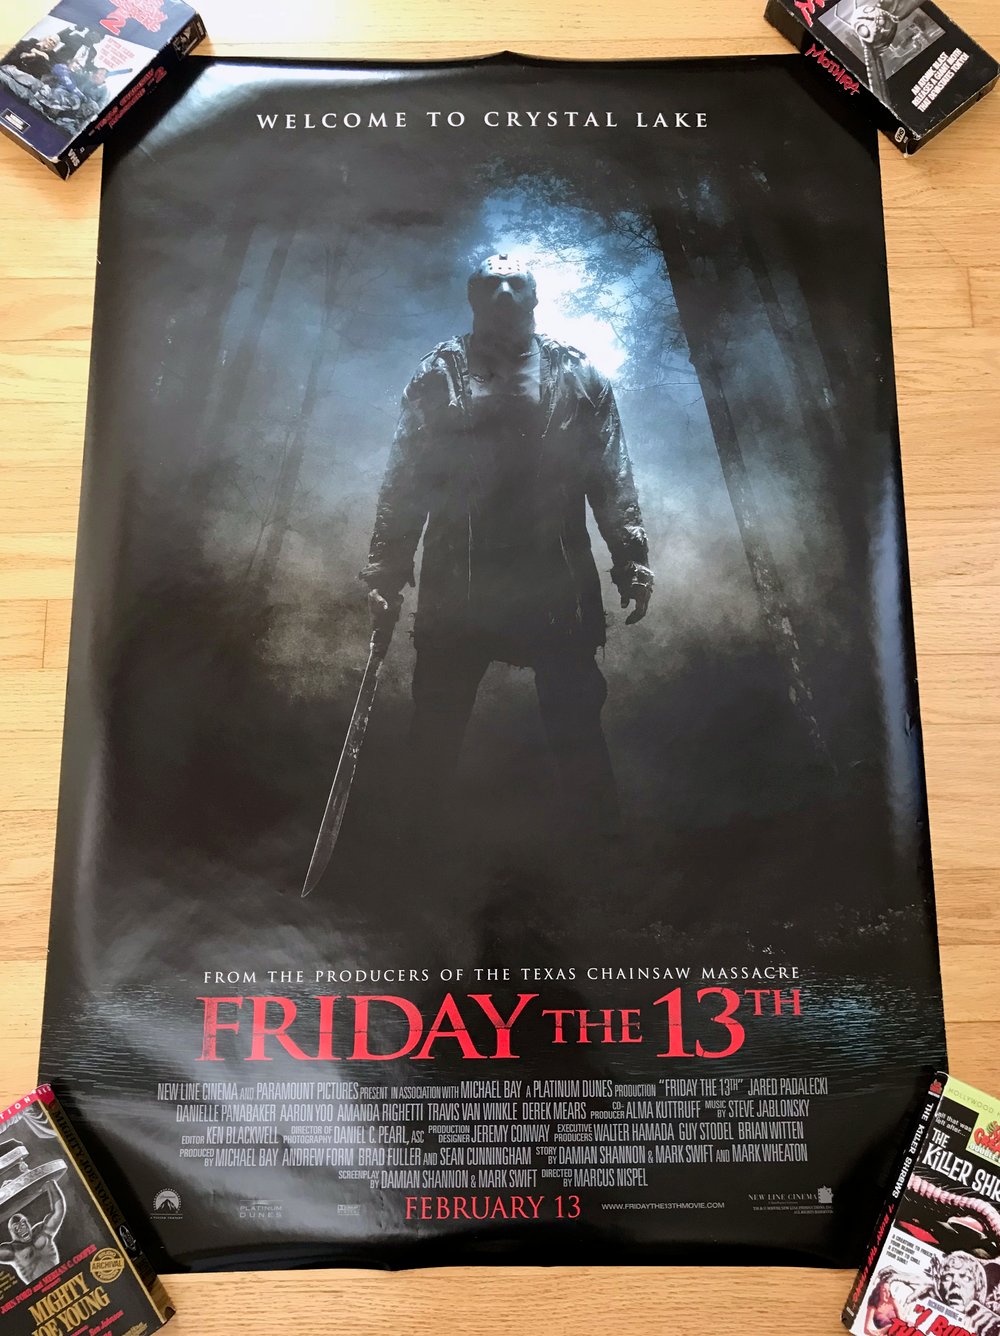 2009 FRIDAY THE 13TH Original Double Sided U.S. One Sheet Movie Poster